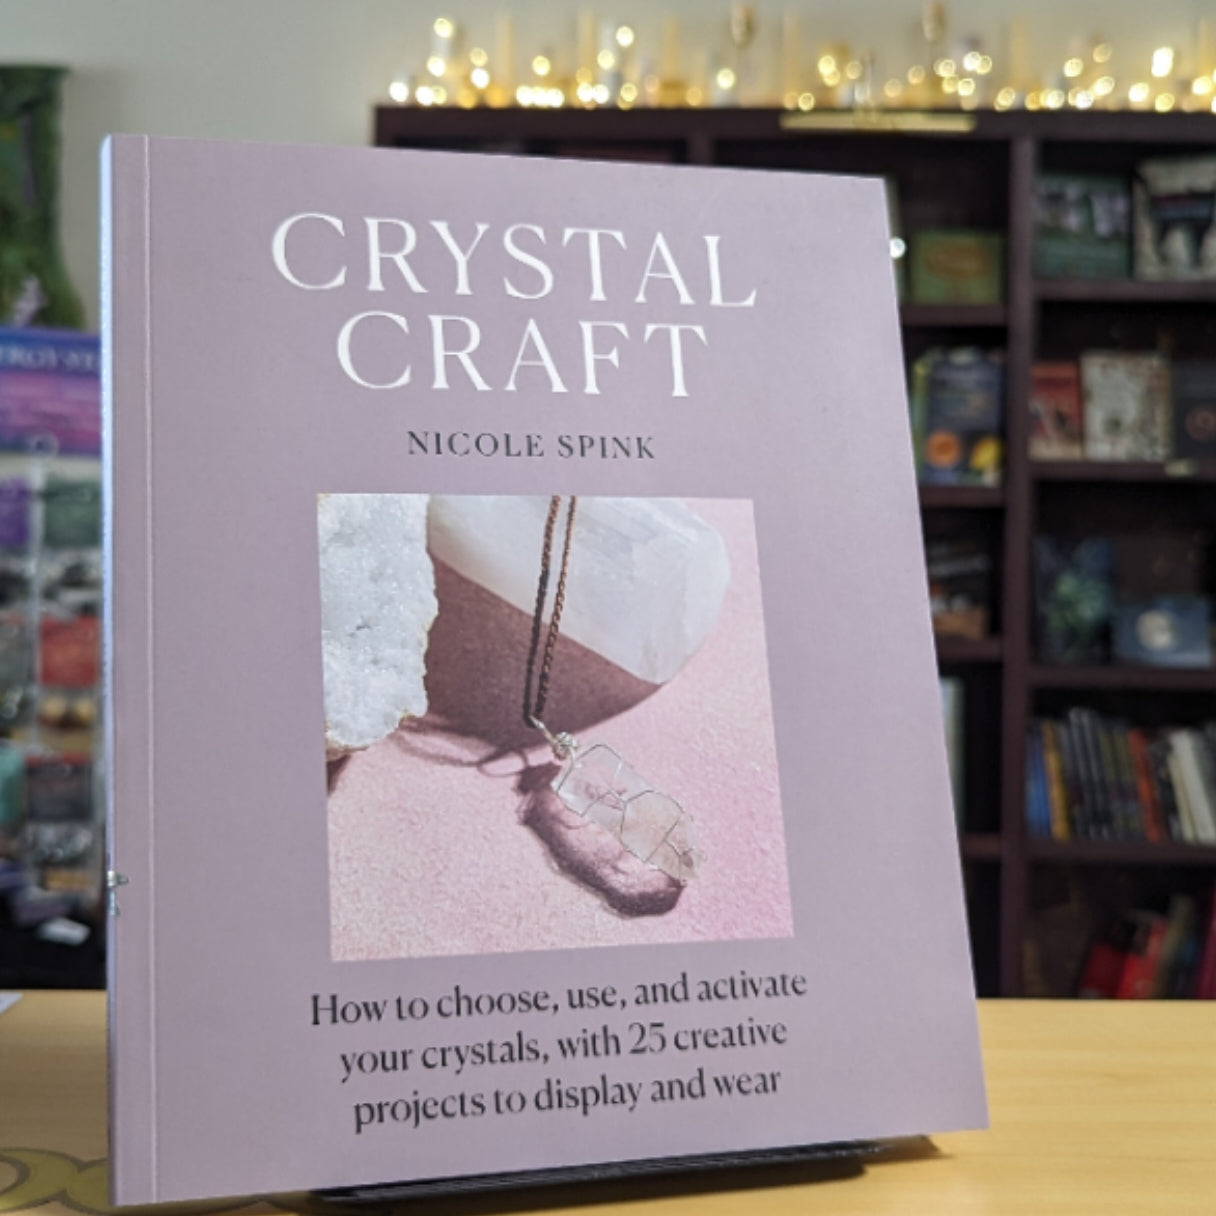 Crystal Craft: How to choose, use, and activate your crystals, with 25 creative projects to display and wear